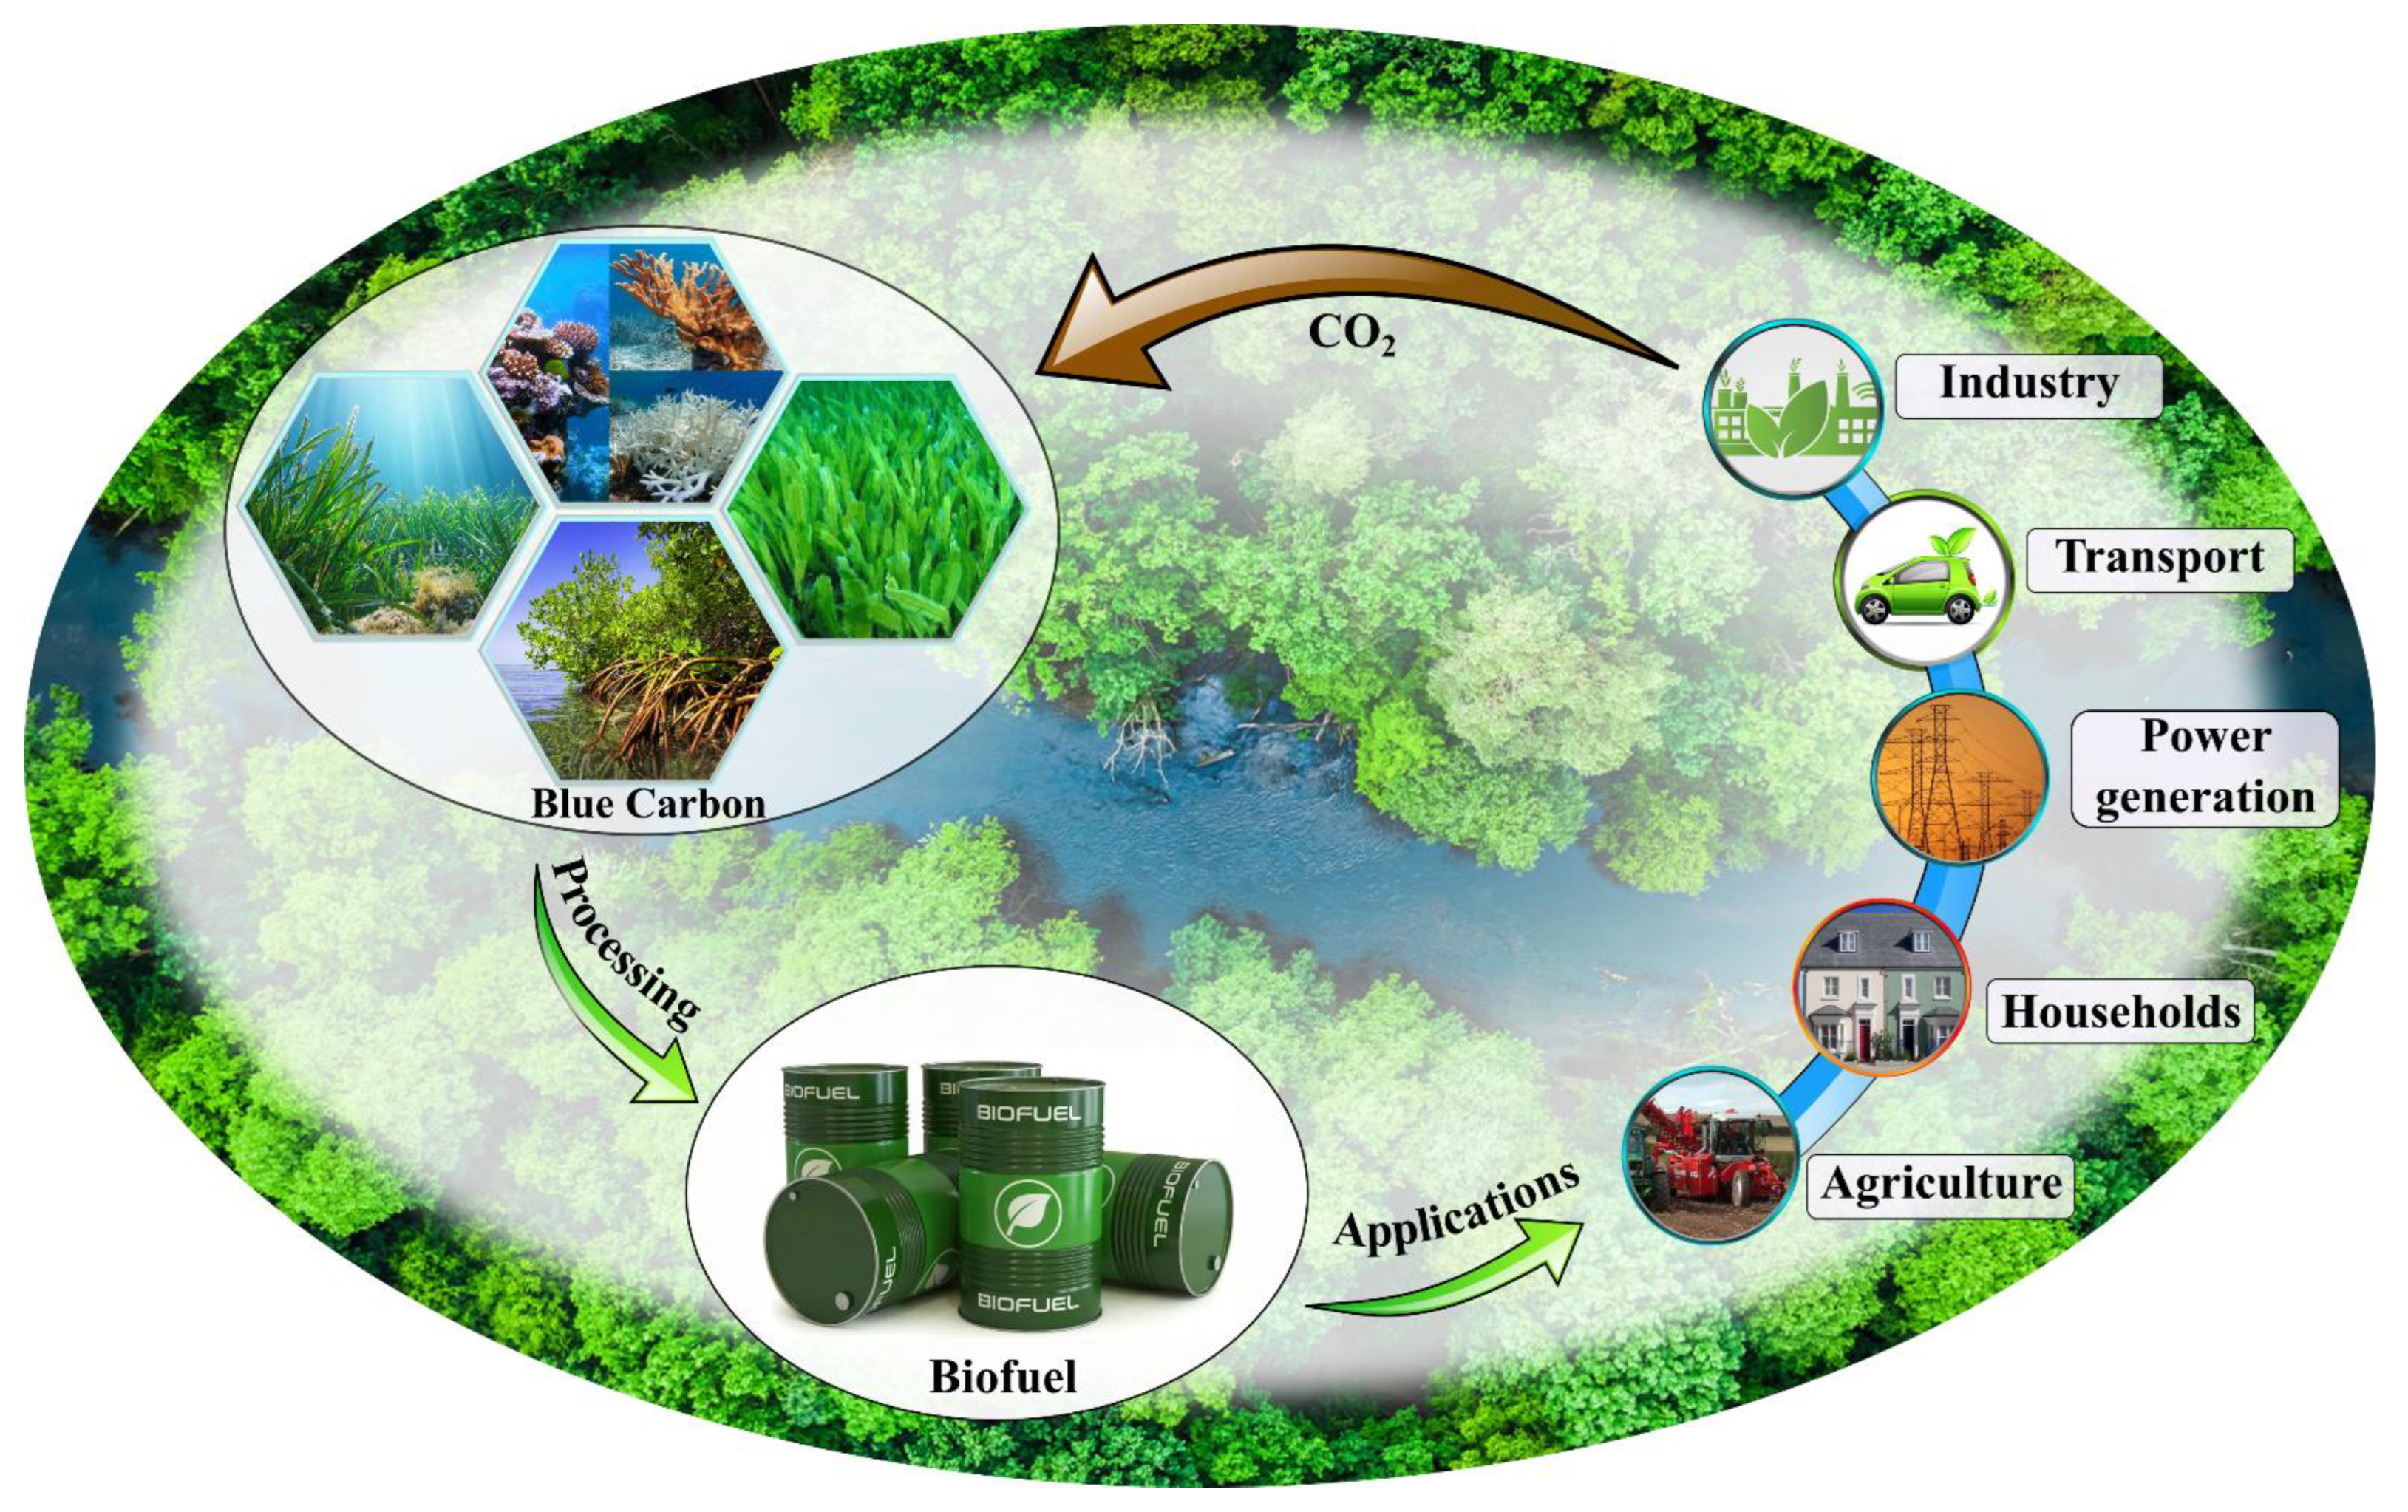 Frontiers  Tropical blue carbon: solutions and perspectives for valuations  of carbon sequestration